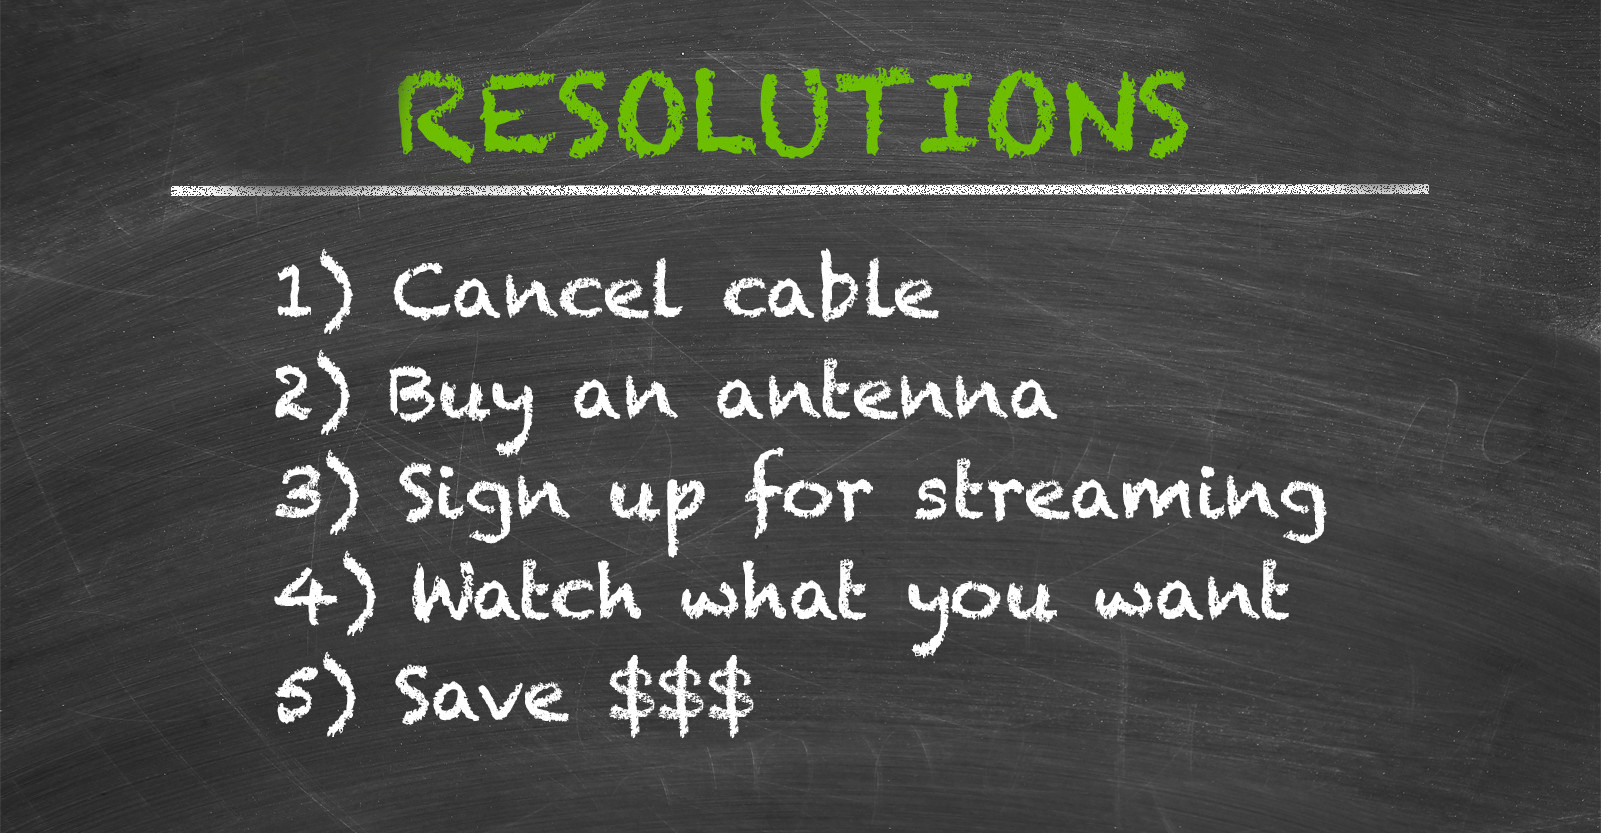 2018 resolution image to cancel cable buy an antenna